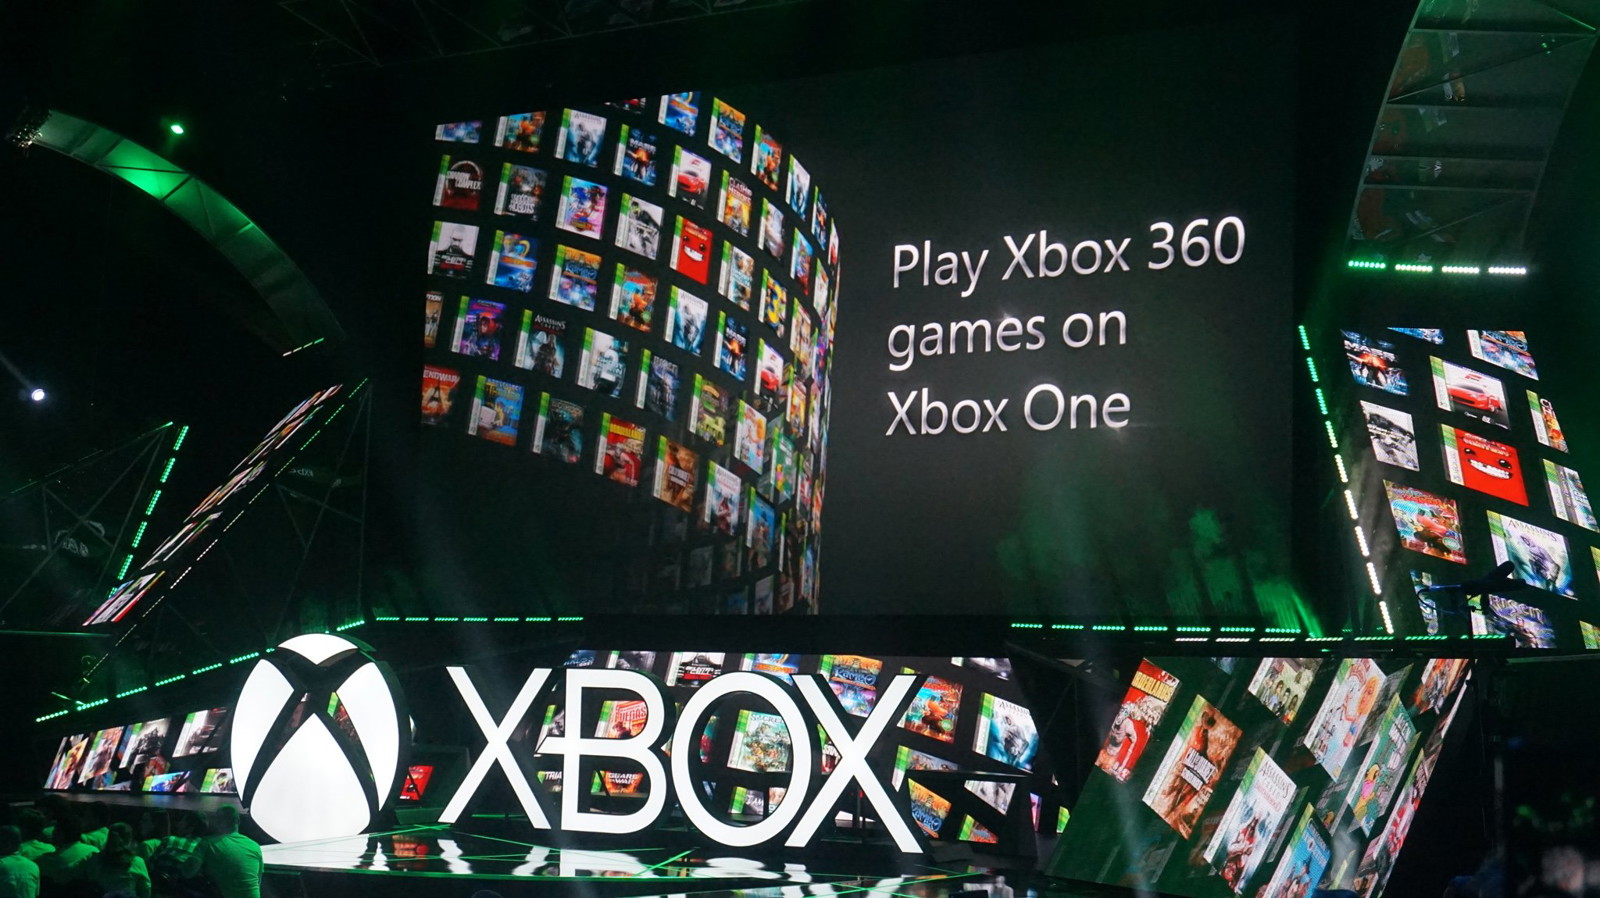 Sarah Bond's immediate goals include preserving older Xbox titles while also keeping them online for as long as possible.